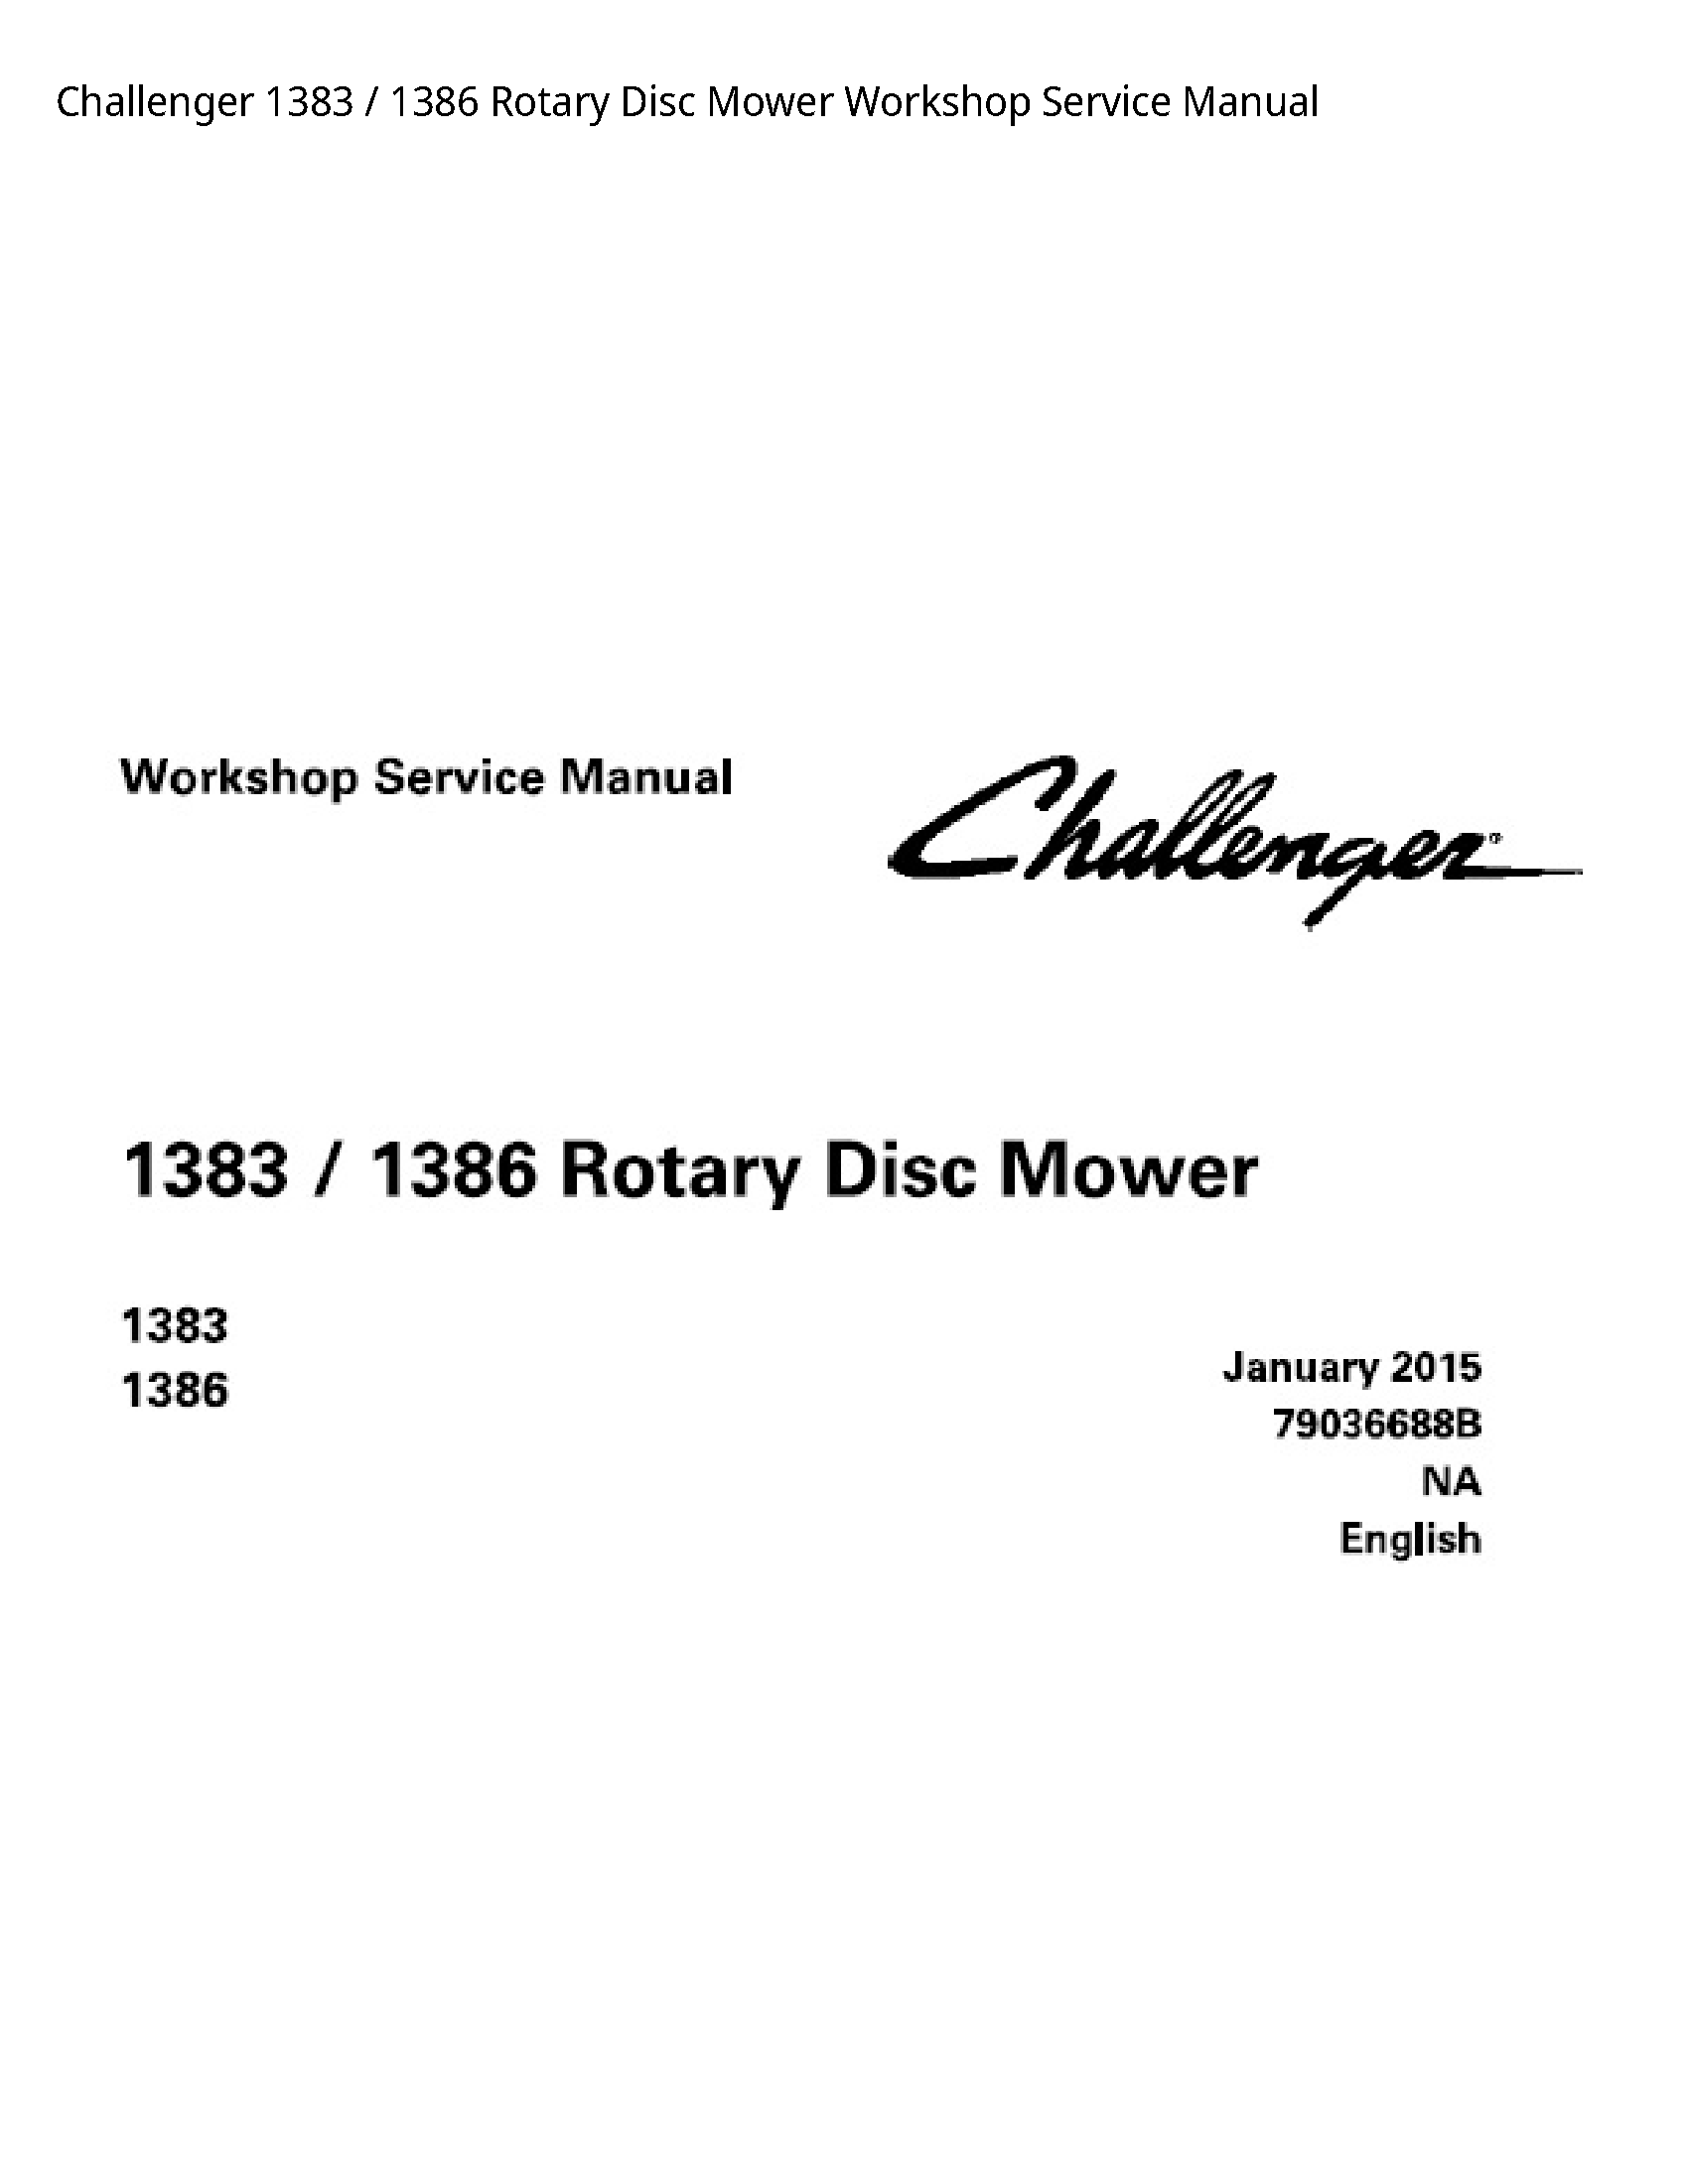 Challenger 1383 Rotary Disc Mower Service manual